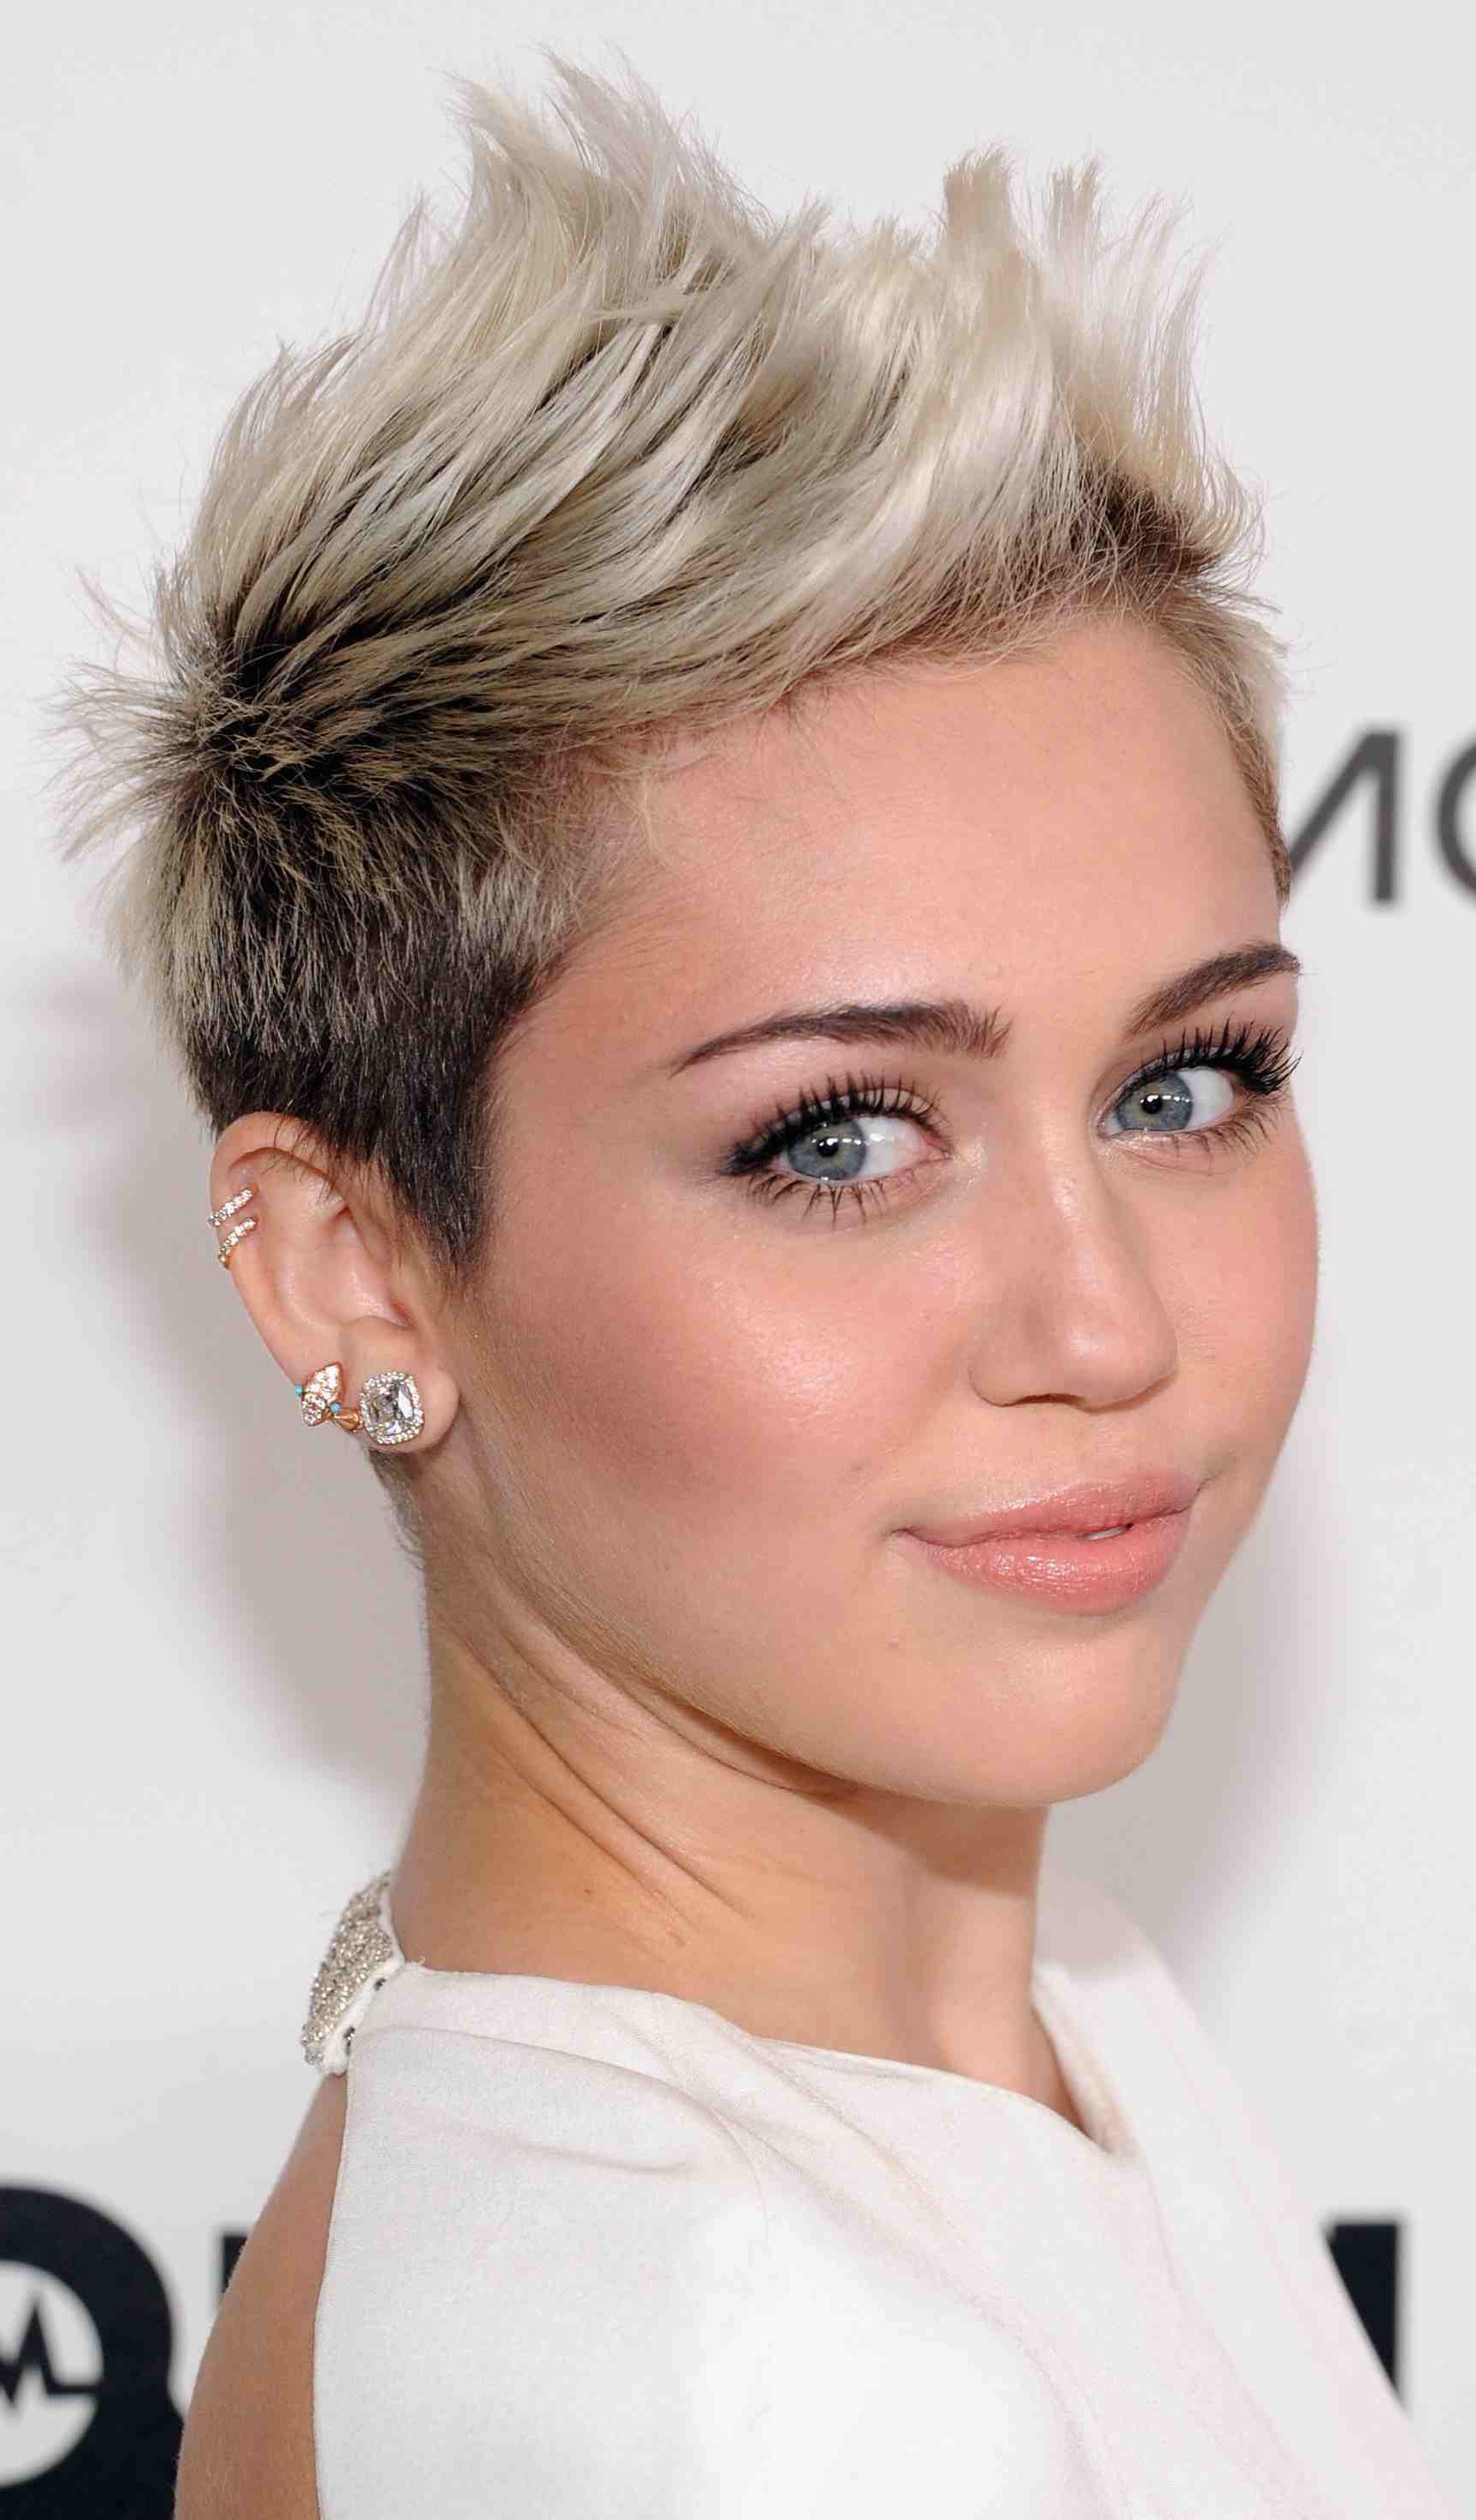 19 Hairstyles Women In Their 20s Can Get Away With Regarding Short Haircuts For Women In 20s (View 12 of 25)